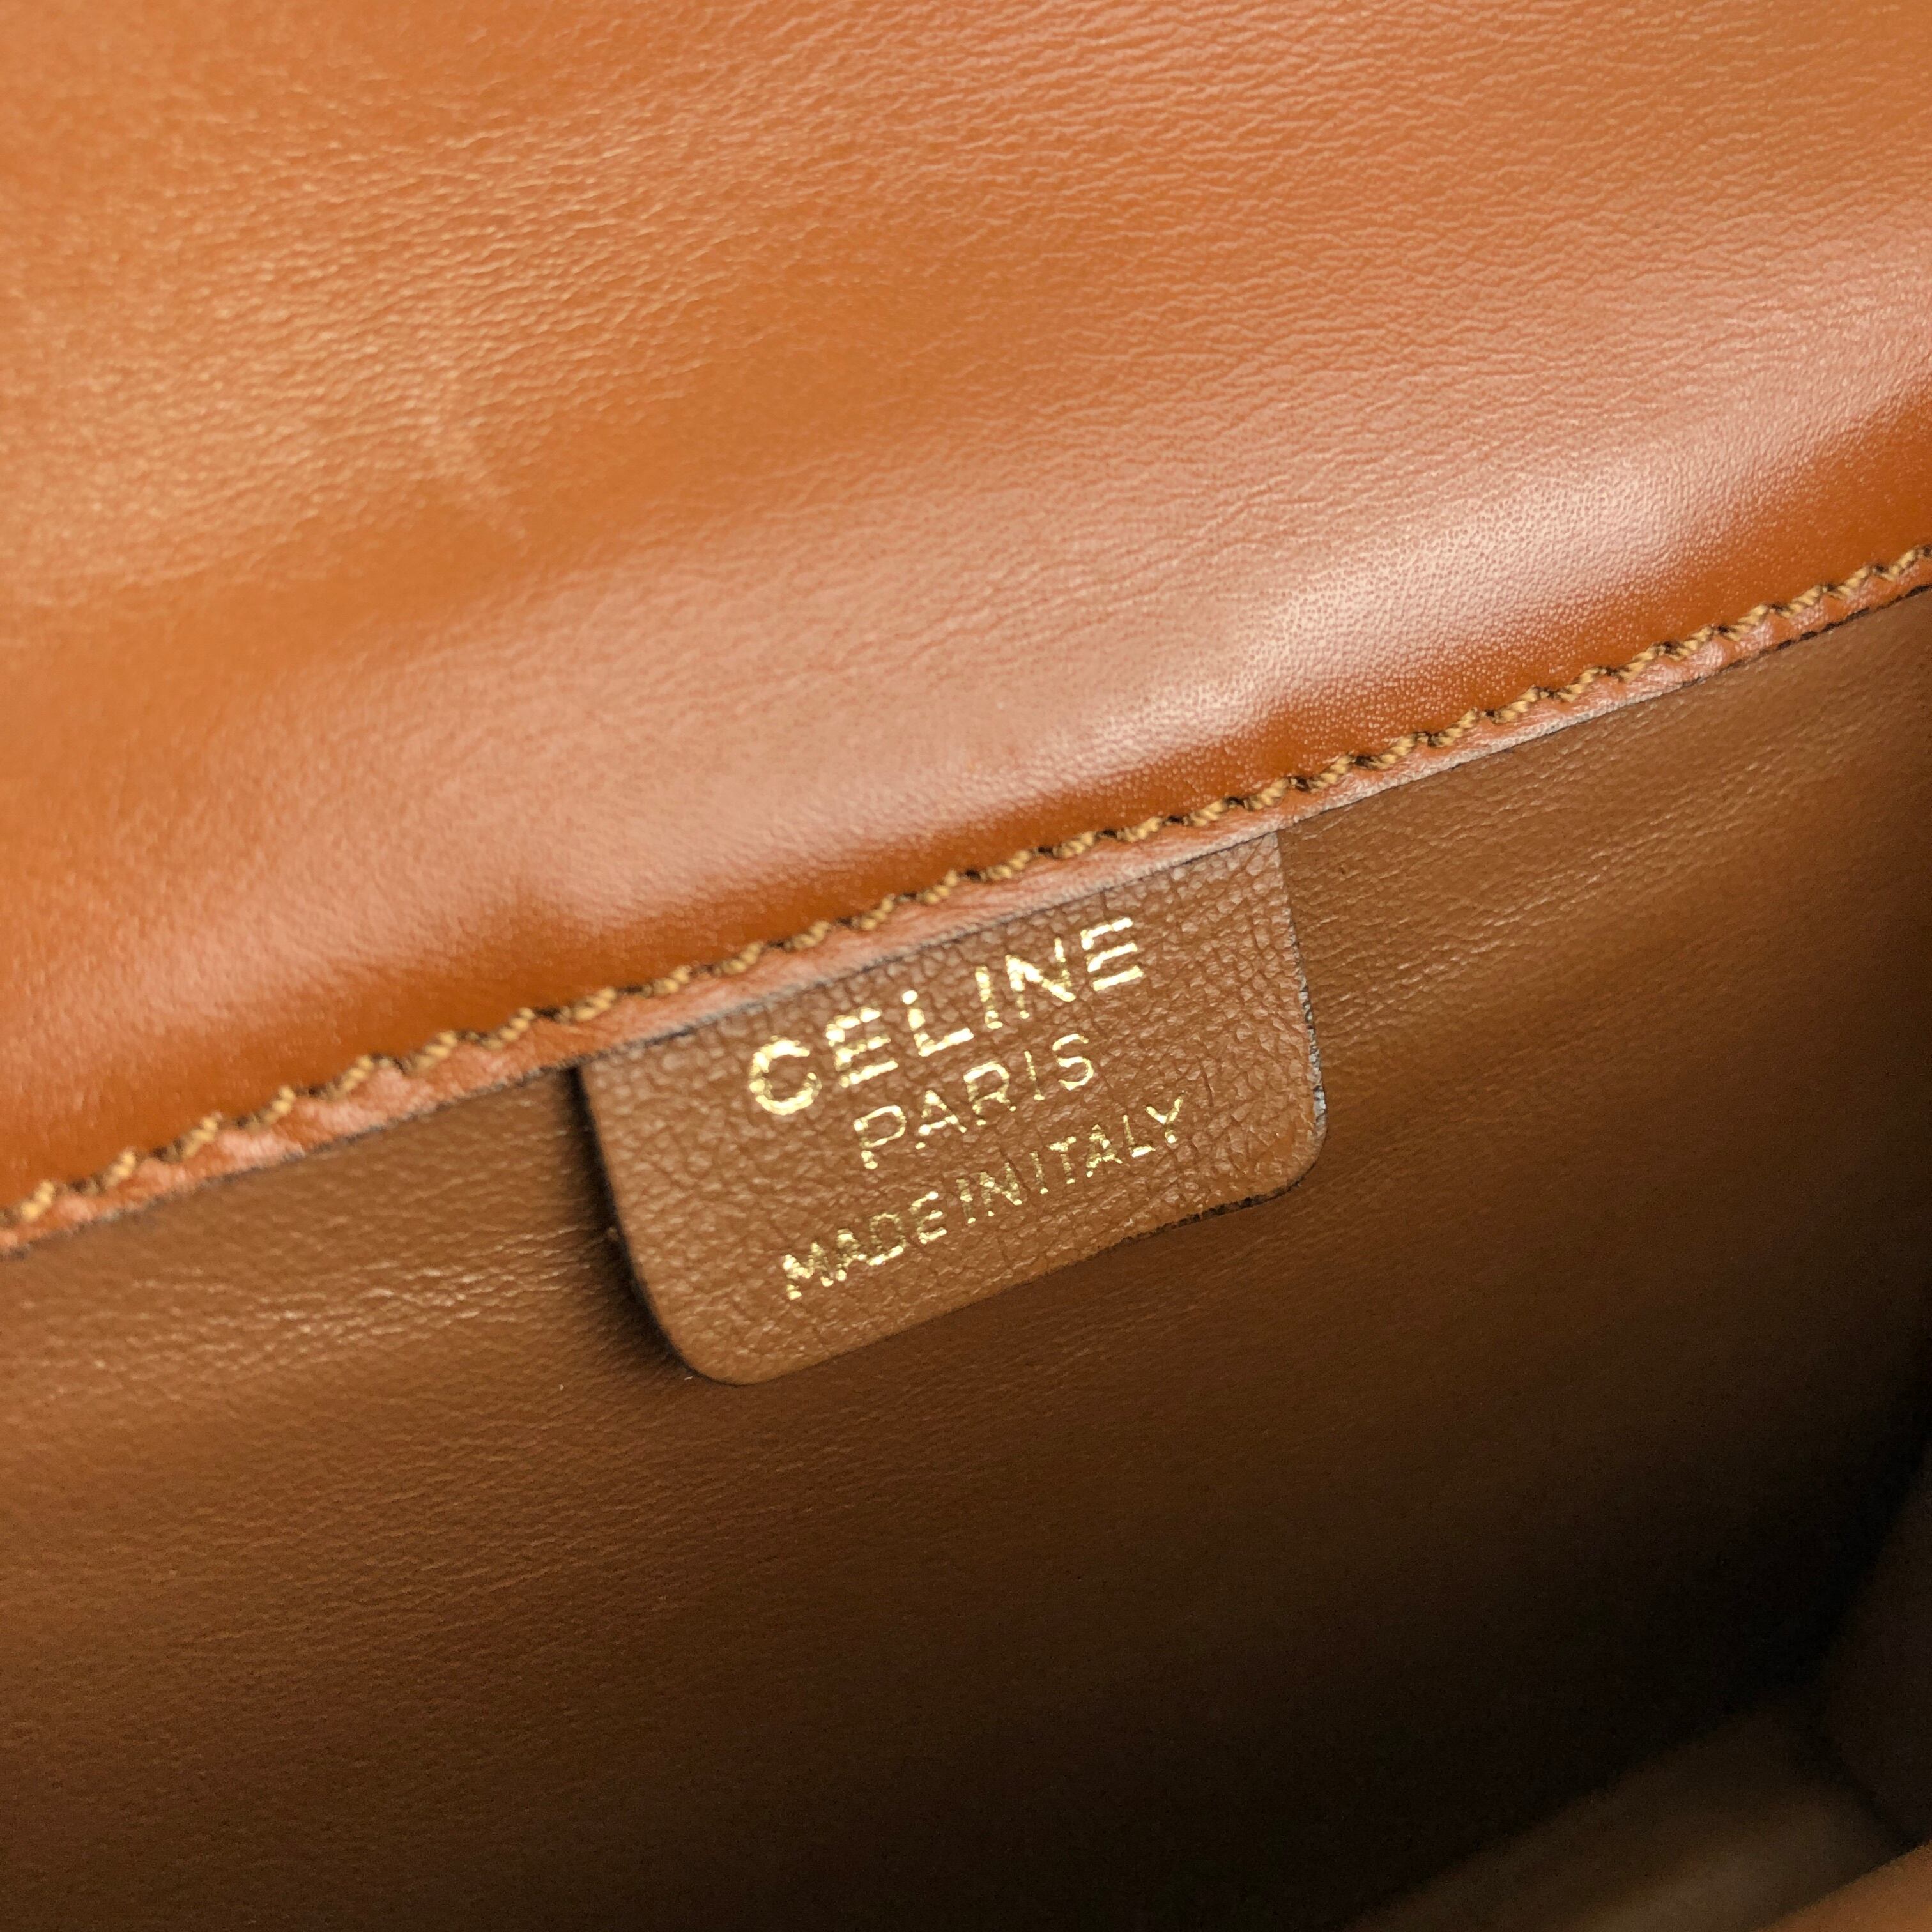 CELINE セリーヌ　スターボール　ポシェット　チェーン　レザー　ショルダーバッグ　ブラウン　オールドセリーヌ 　ヴィンテージ 　vintage　 7fxcuv | VintageShop solo powered by BASE